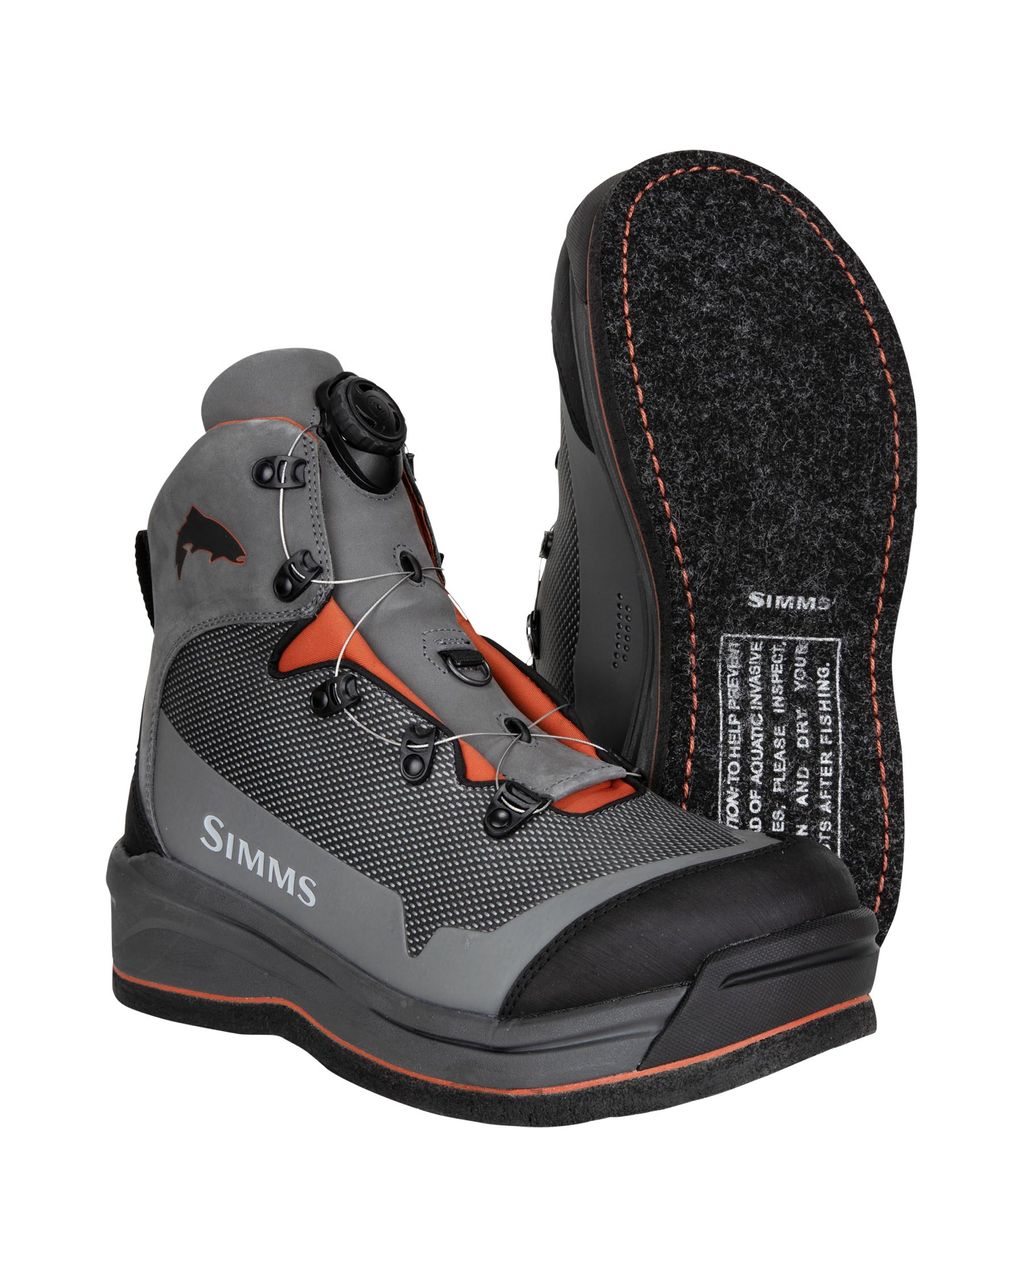 Simms M's Guide BOA Wading Boot - Felt - Size 14